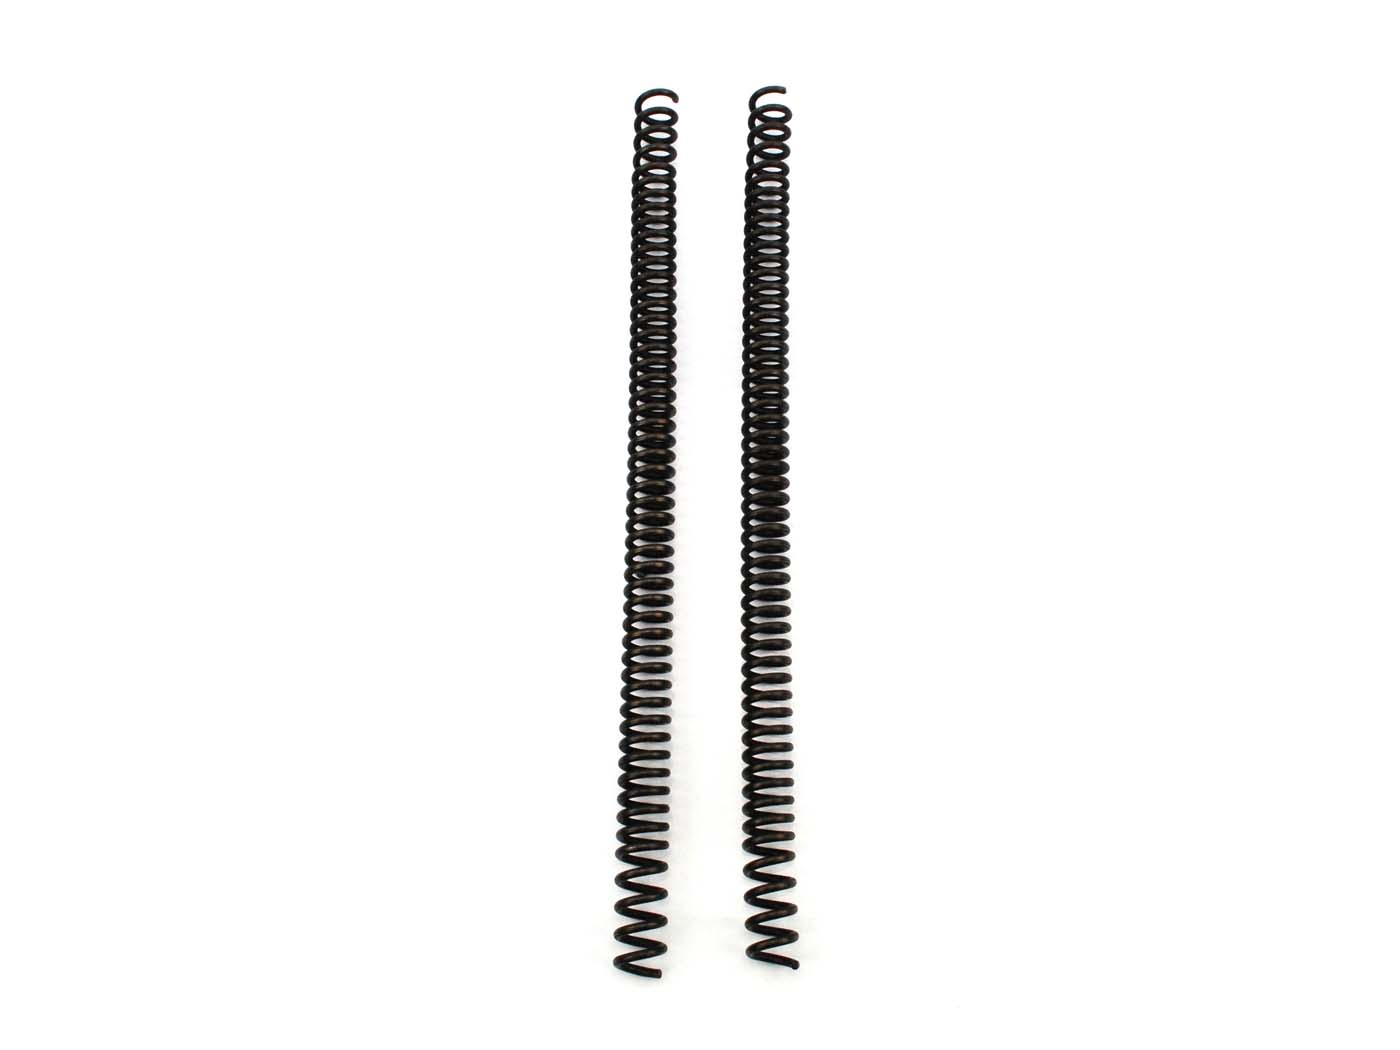 Fork Spring Pränafa 2 Pieces Length Approx. 410mm Diameter 22mm Wire Thickness 4mm For Hercules, Prima GT, GX, Presto, Pronto, Moped